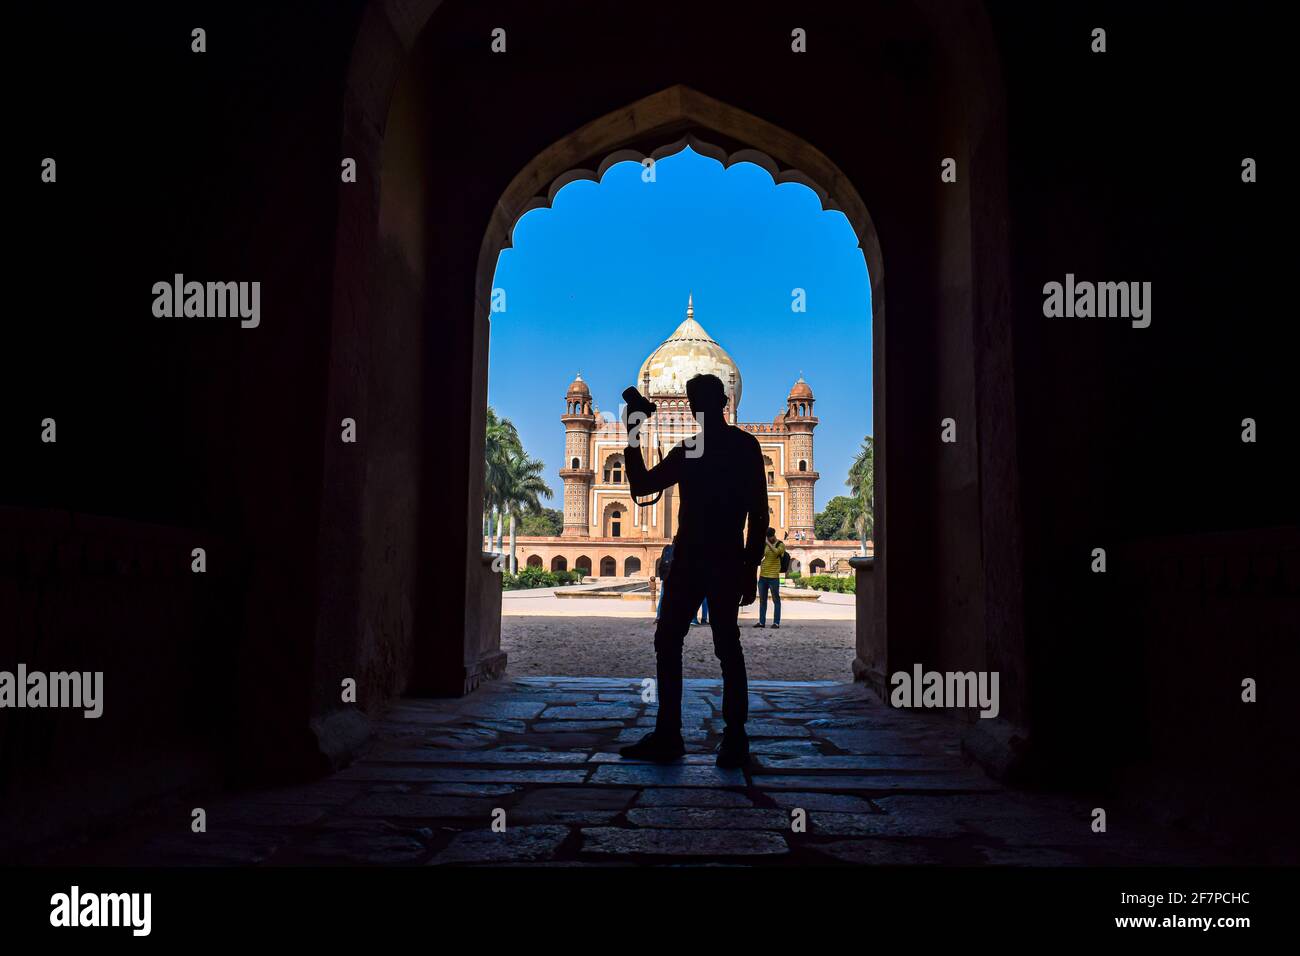 silhouette portrait of a man at safdarjung tomb.it is a red sand stone marble monument in delhi,india. Stock Photo